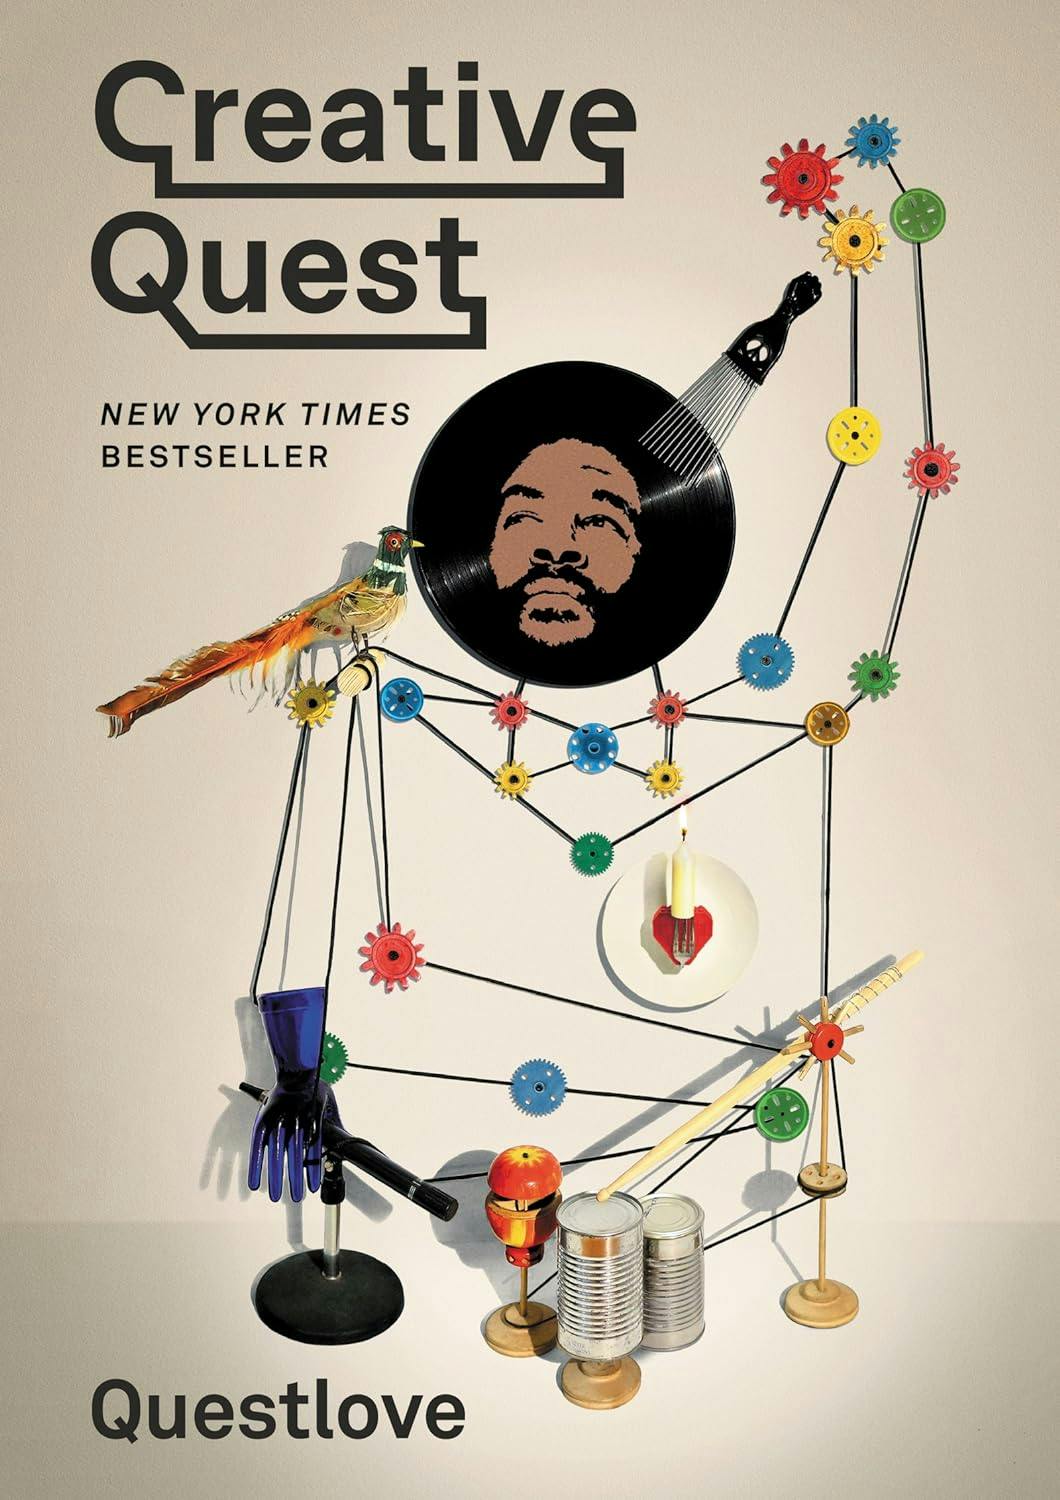 Book jacket for Creative Quest by Questlove.